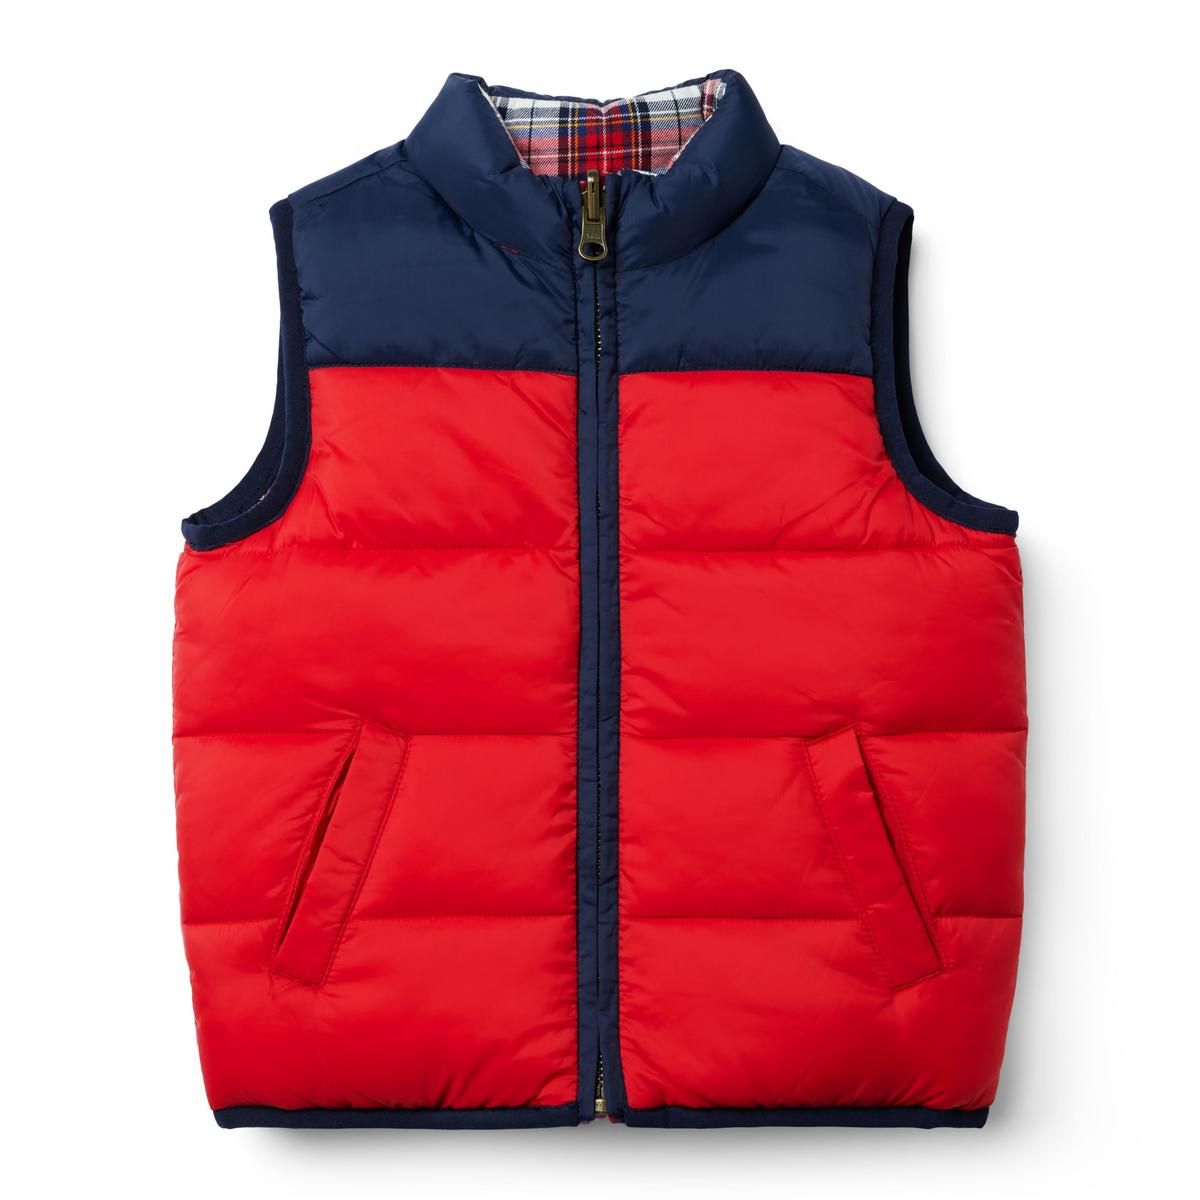 The Reversible Tartan Puffer Vest | Janie and Jack